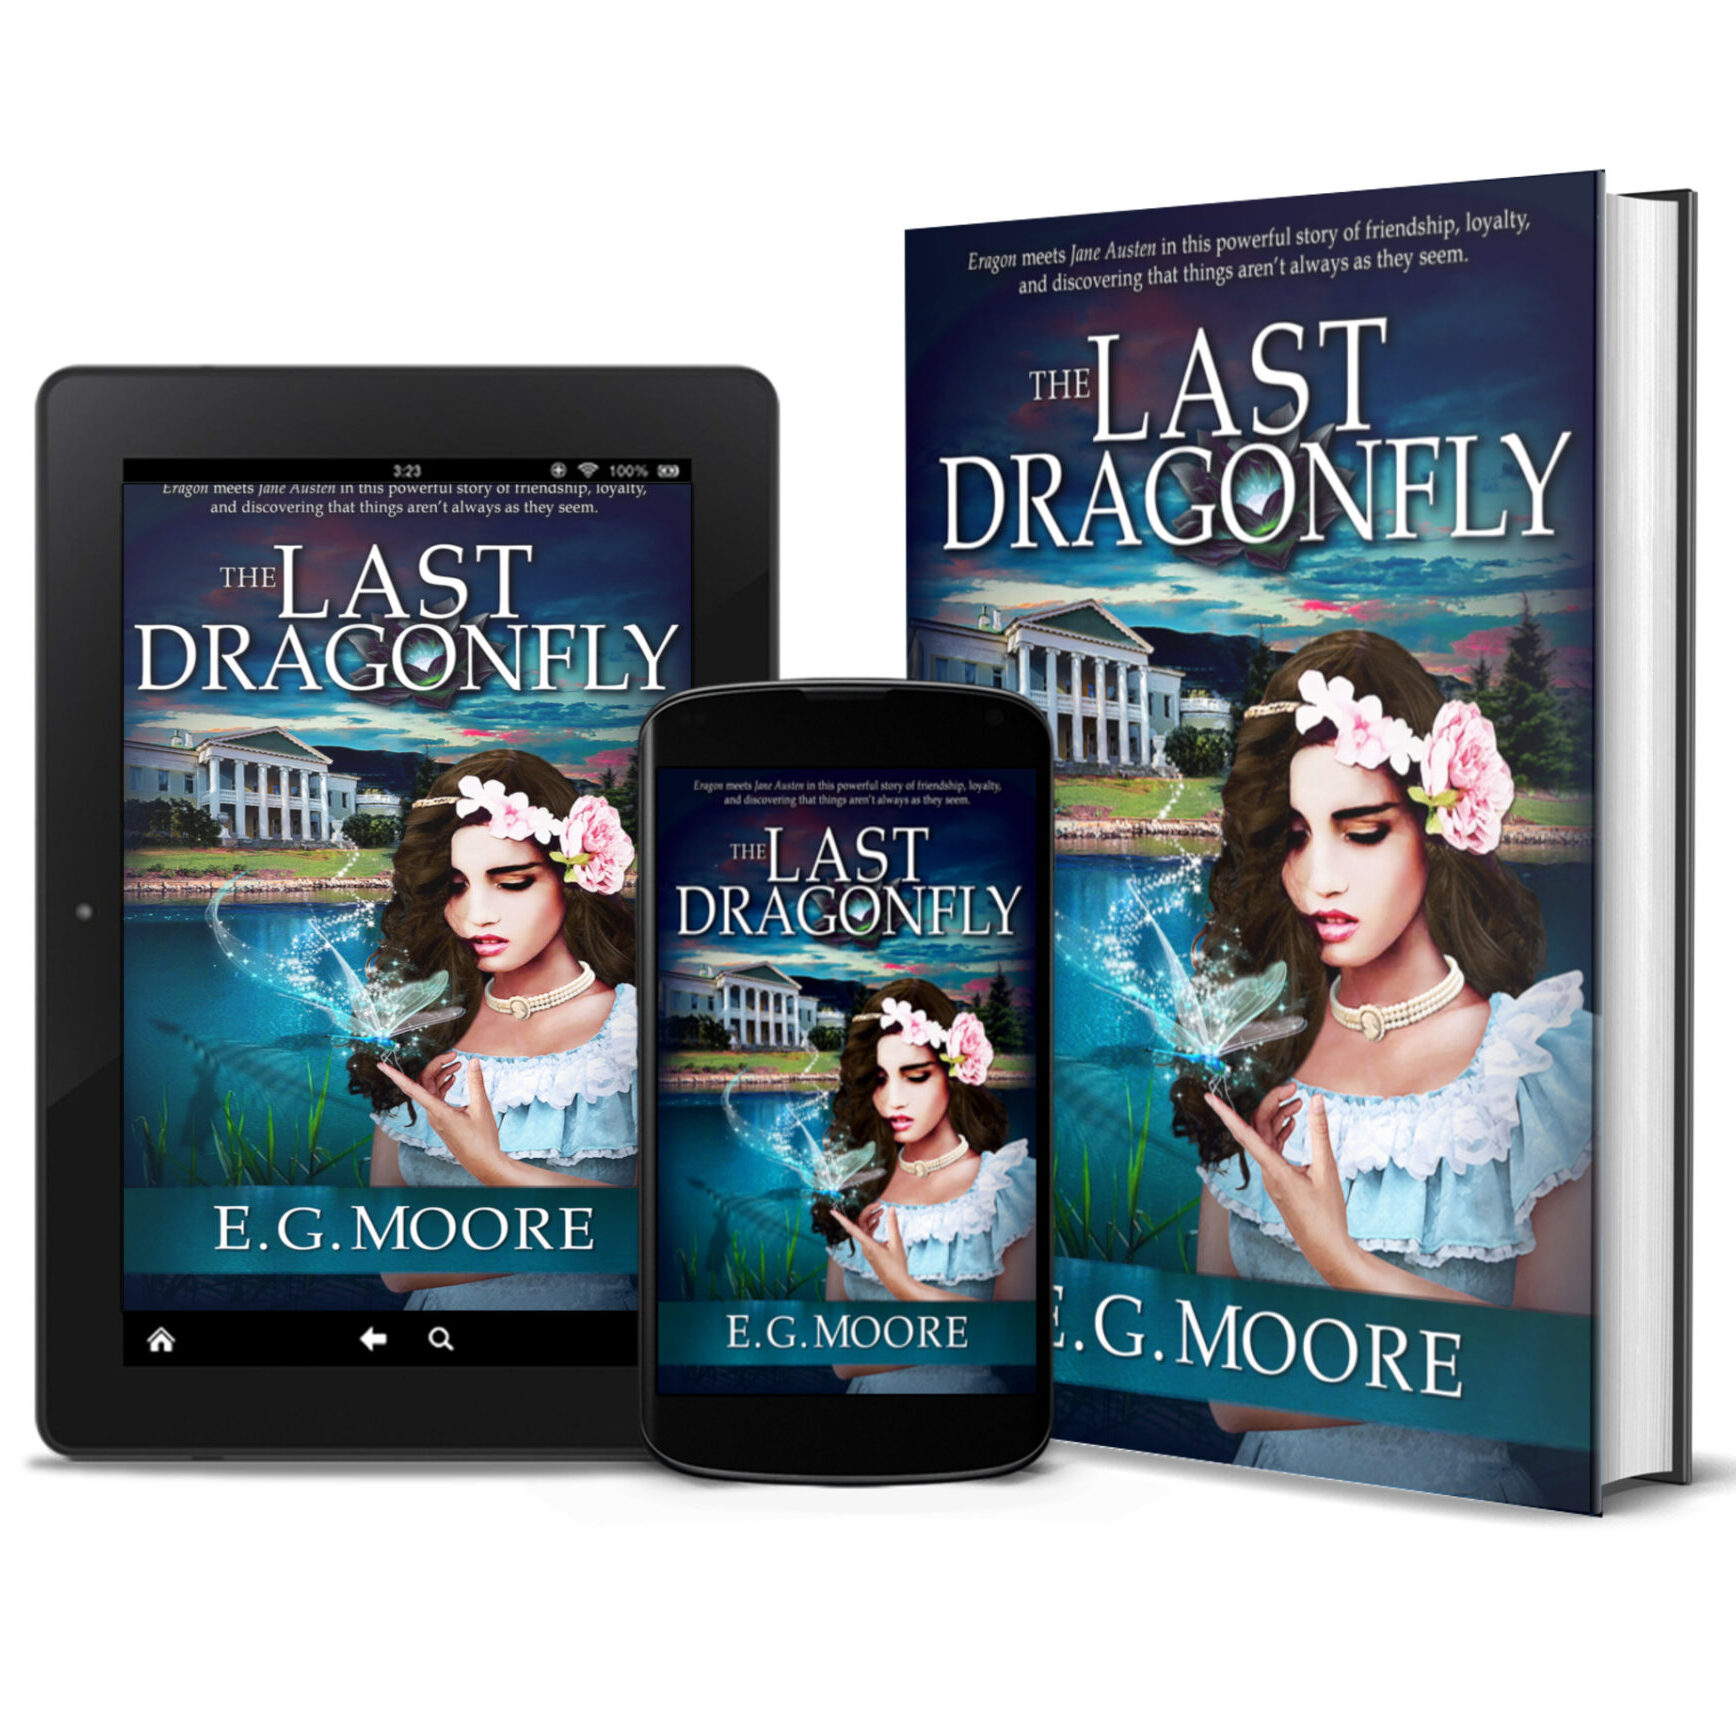 The Last Dragonfly cover triple composite 3D mockup.